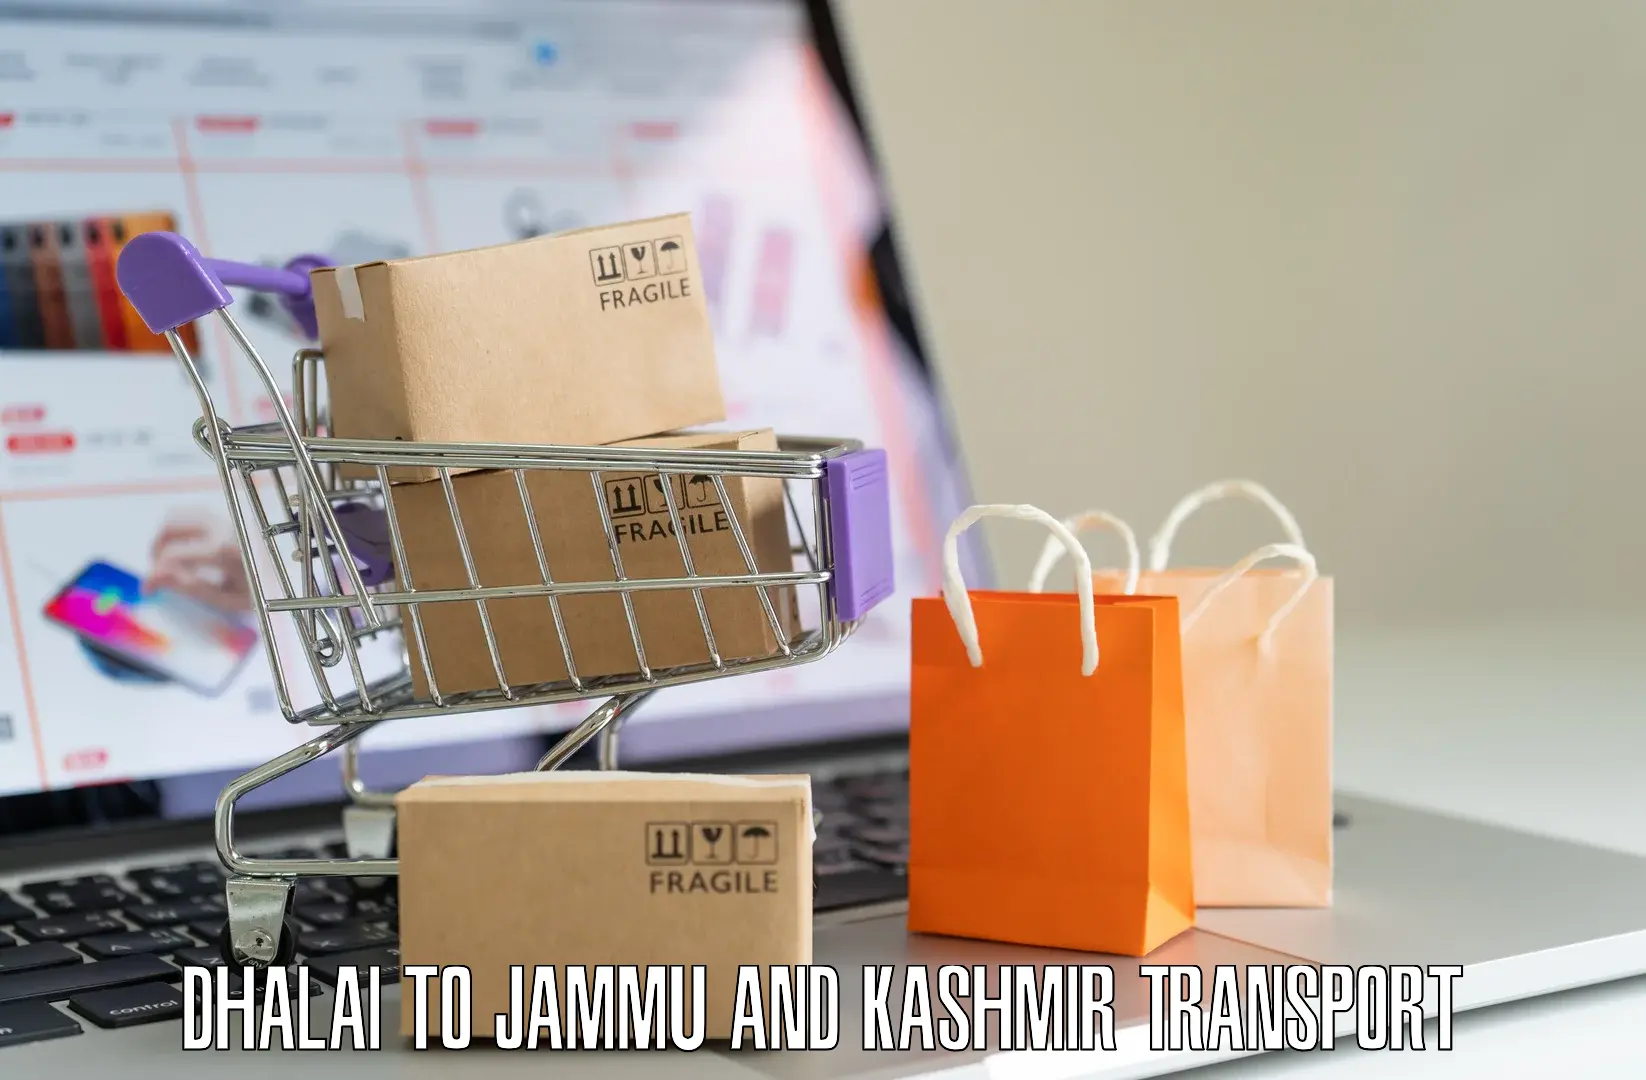 Parcel transport services Dhalai to Jammu and Kashmir